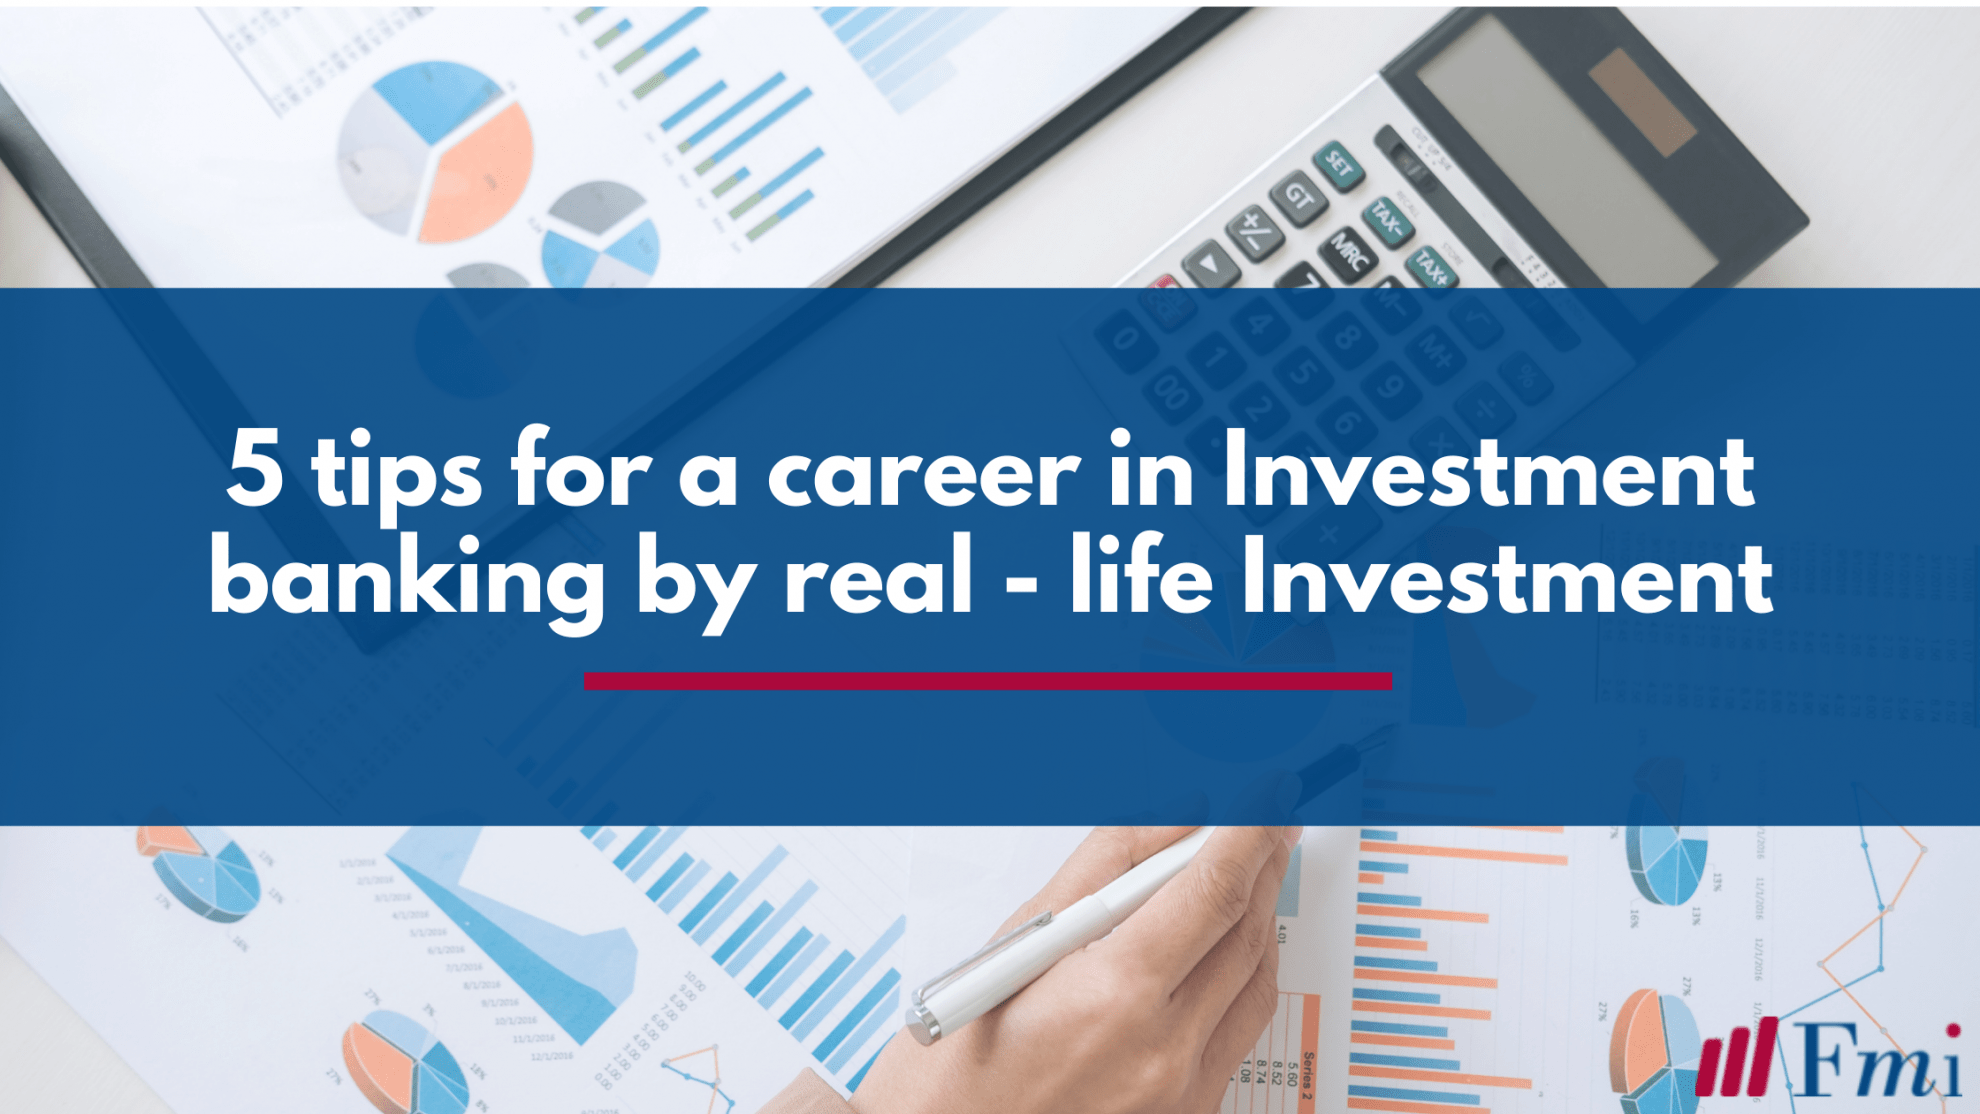 5 Tips for a career in Investment Banking by a real-life Investment Banker